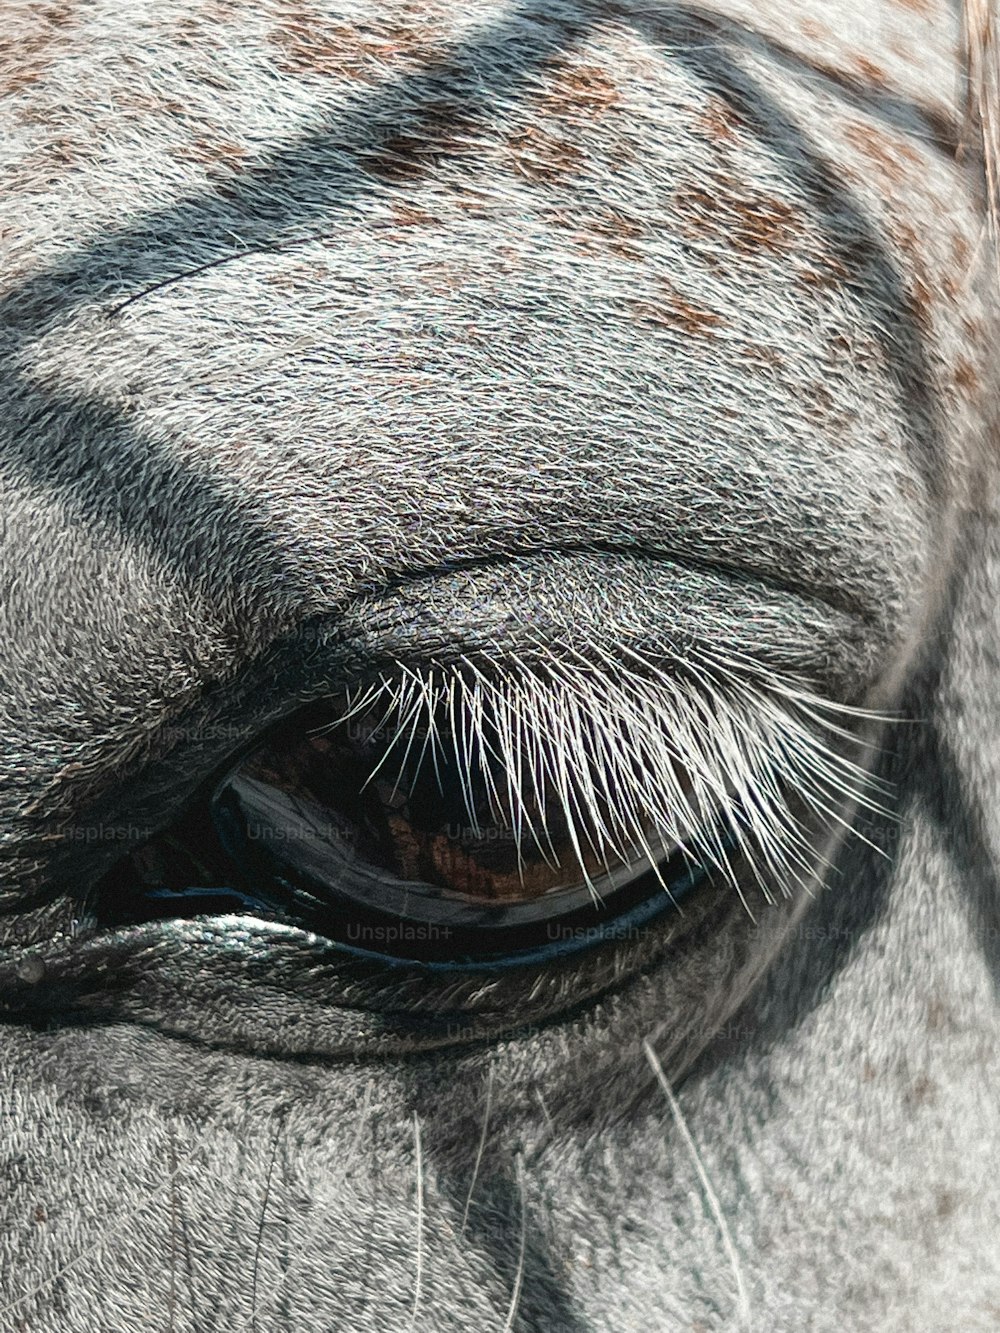 a close up of the eye of a horse